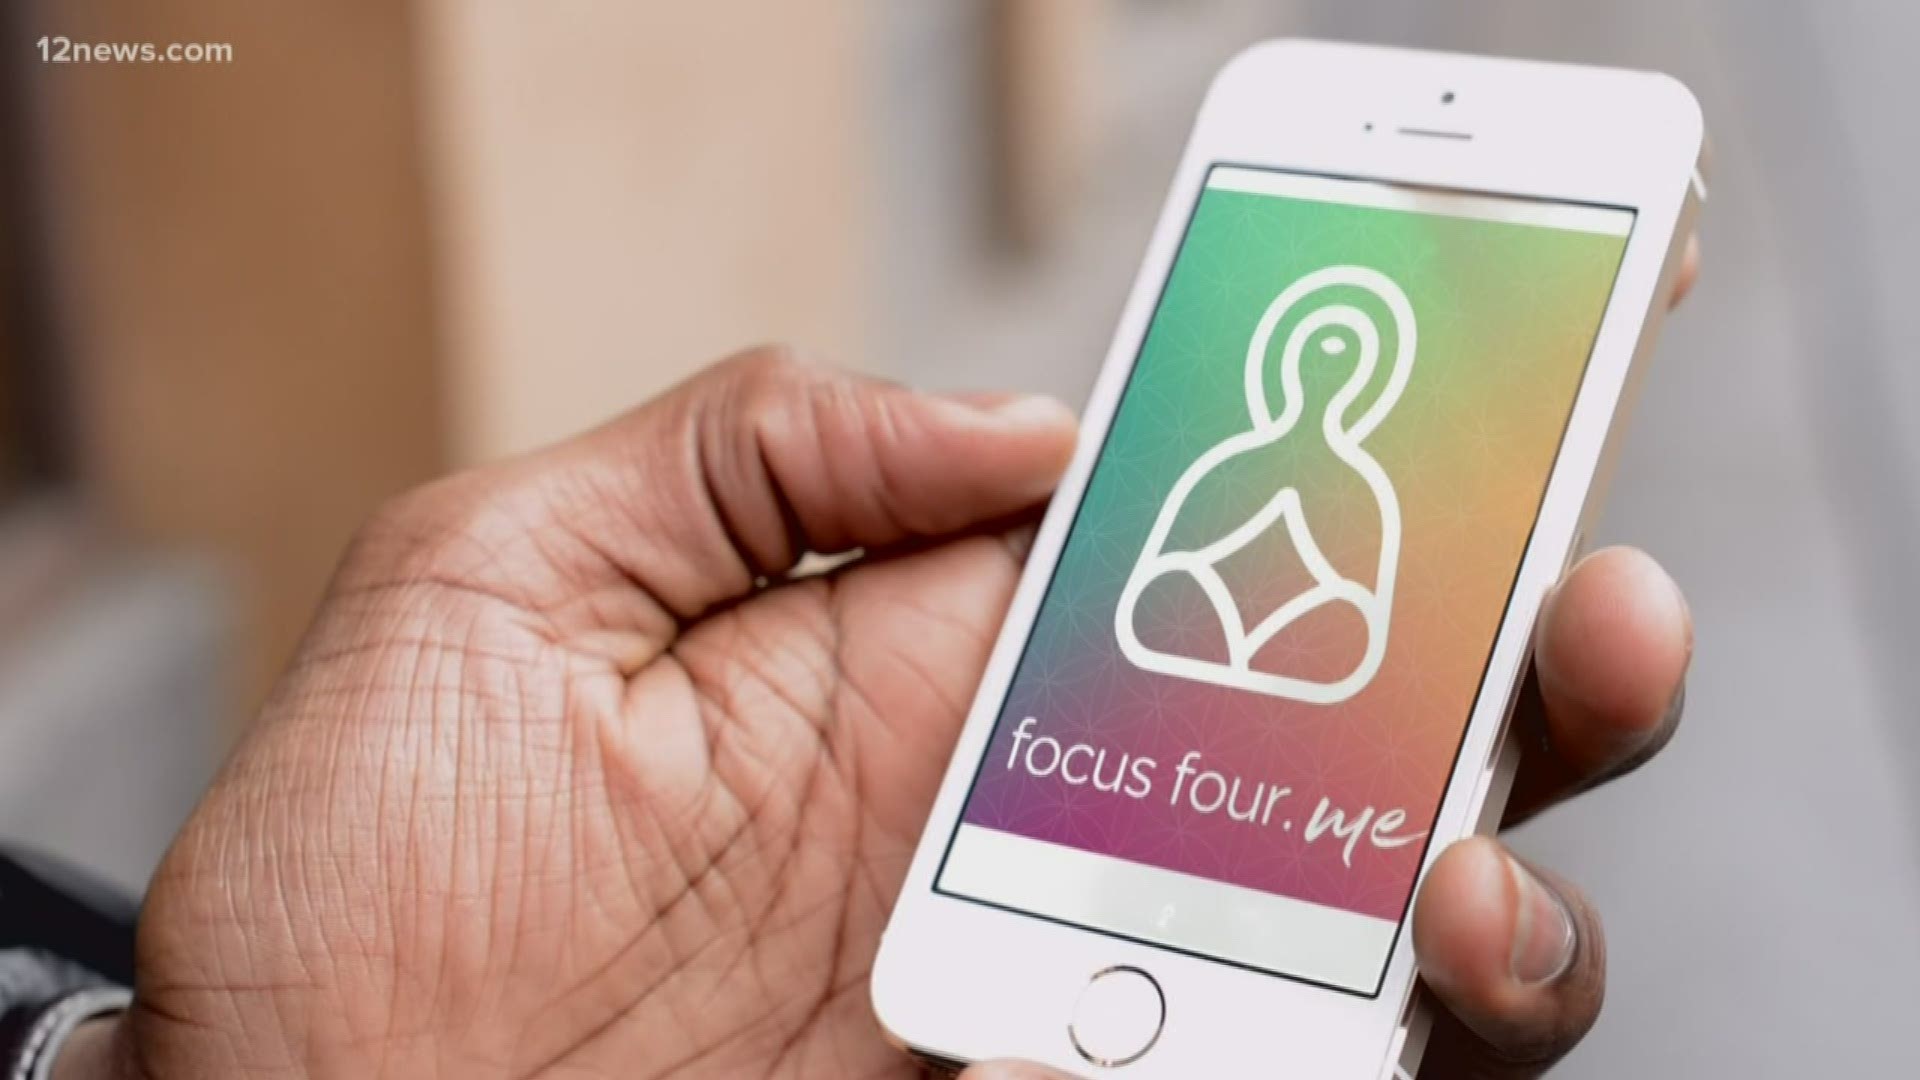 The developer of the "Focus Four Me" app helps students disrupt bad thoughts and prevent bullying in schools.